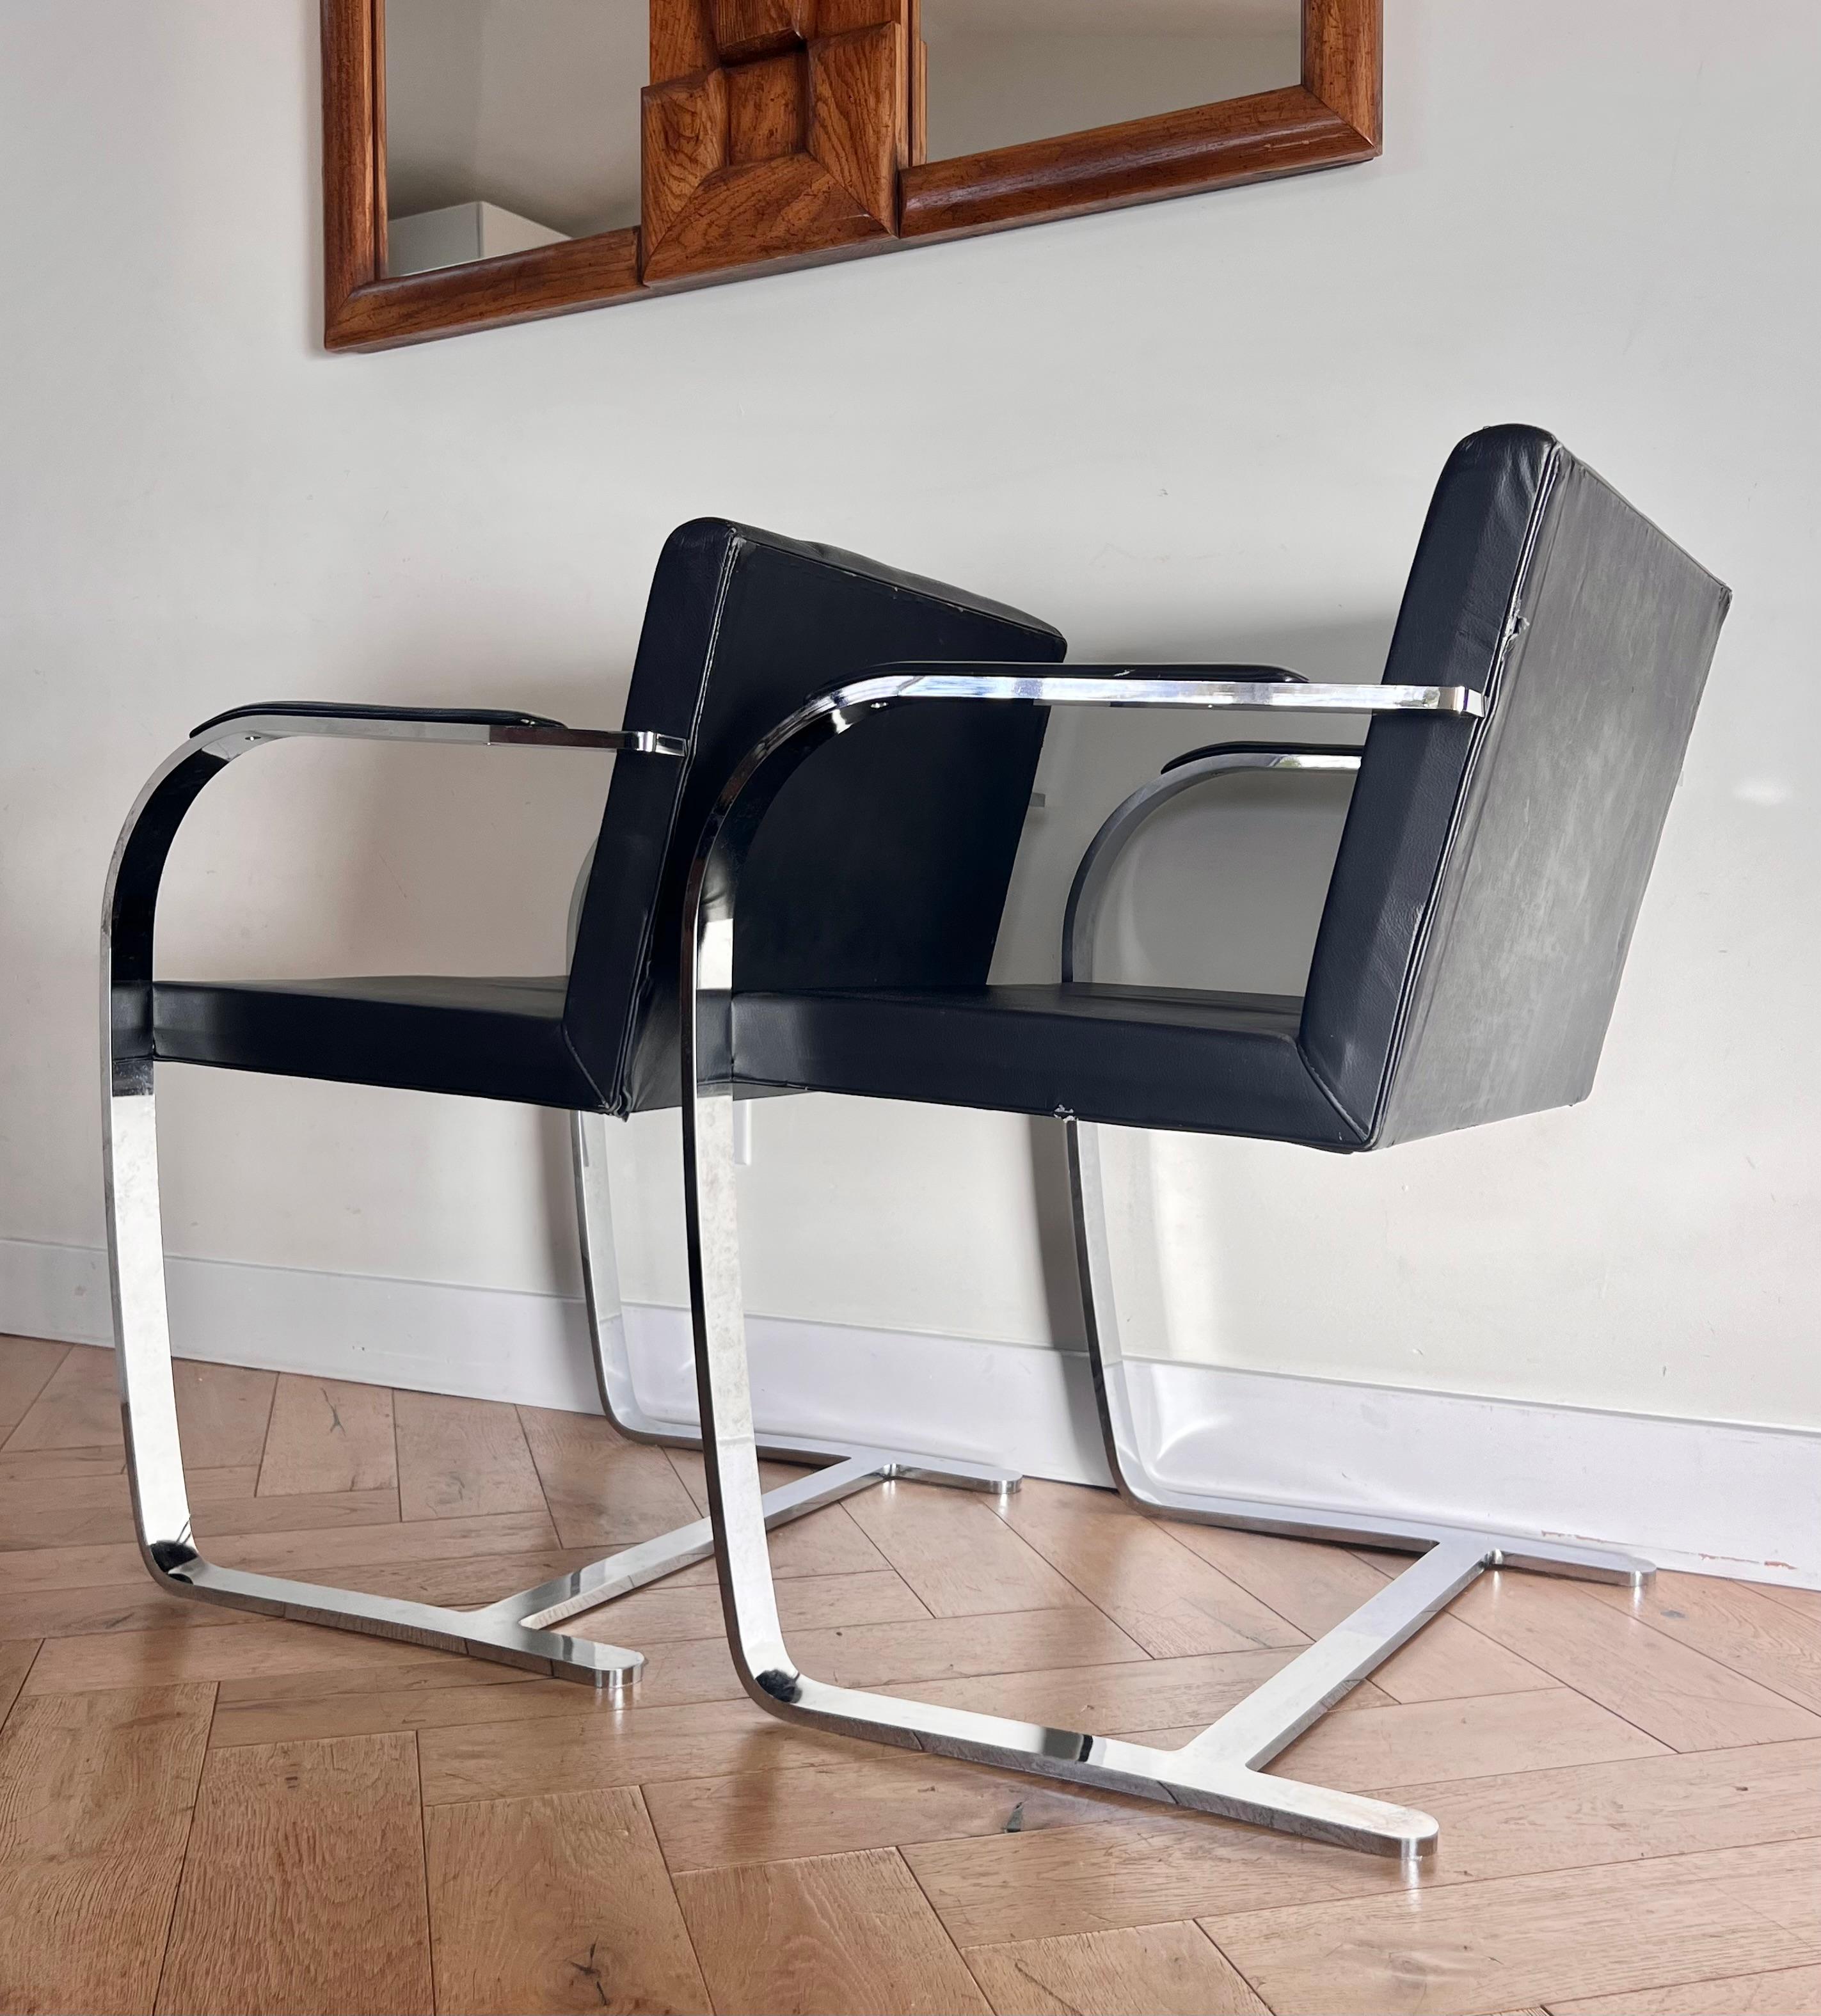 Italian Pair of Mies van der Rohe Brno chairs by Palazzetti, 1970s For Sale